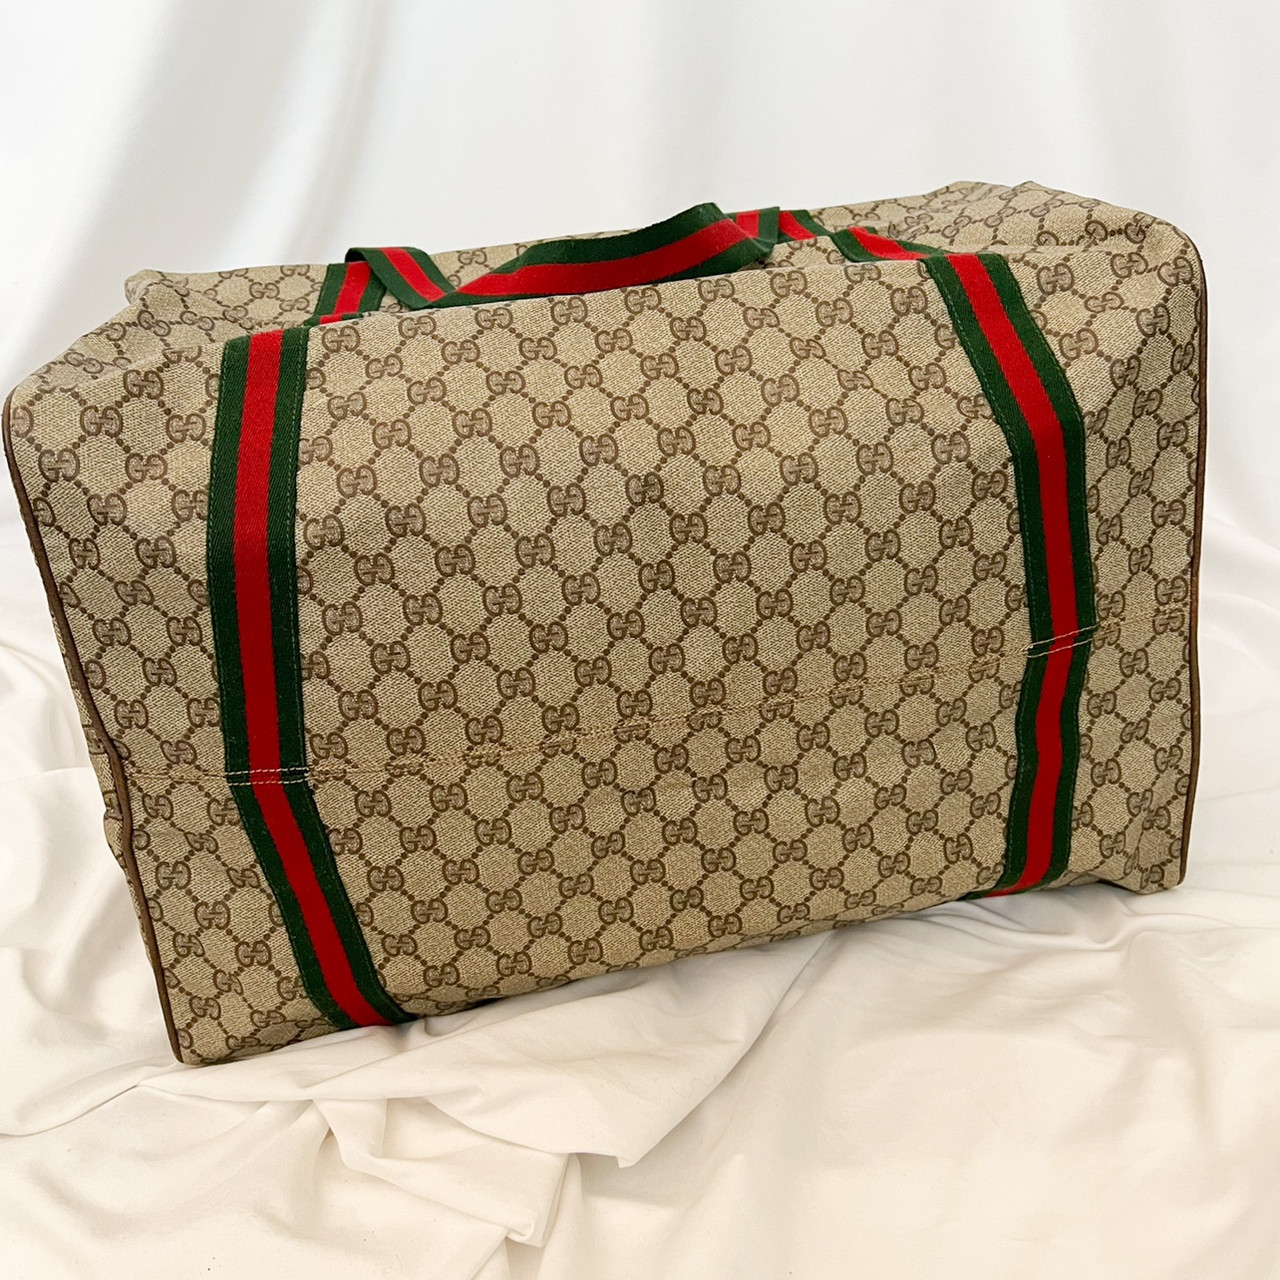 VINTAGE GUCCI DUFFLE BAG, Gently Used!, Perfect